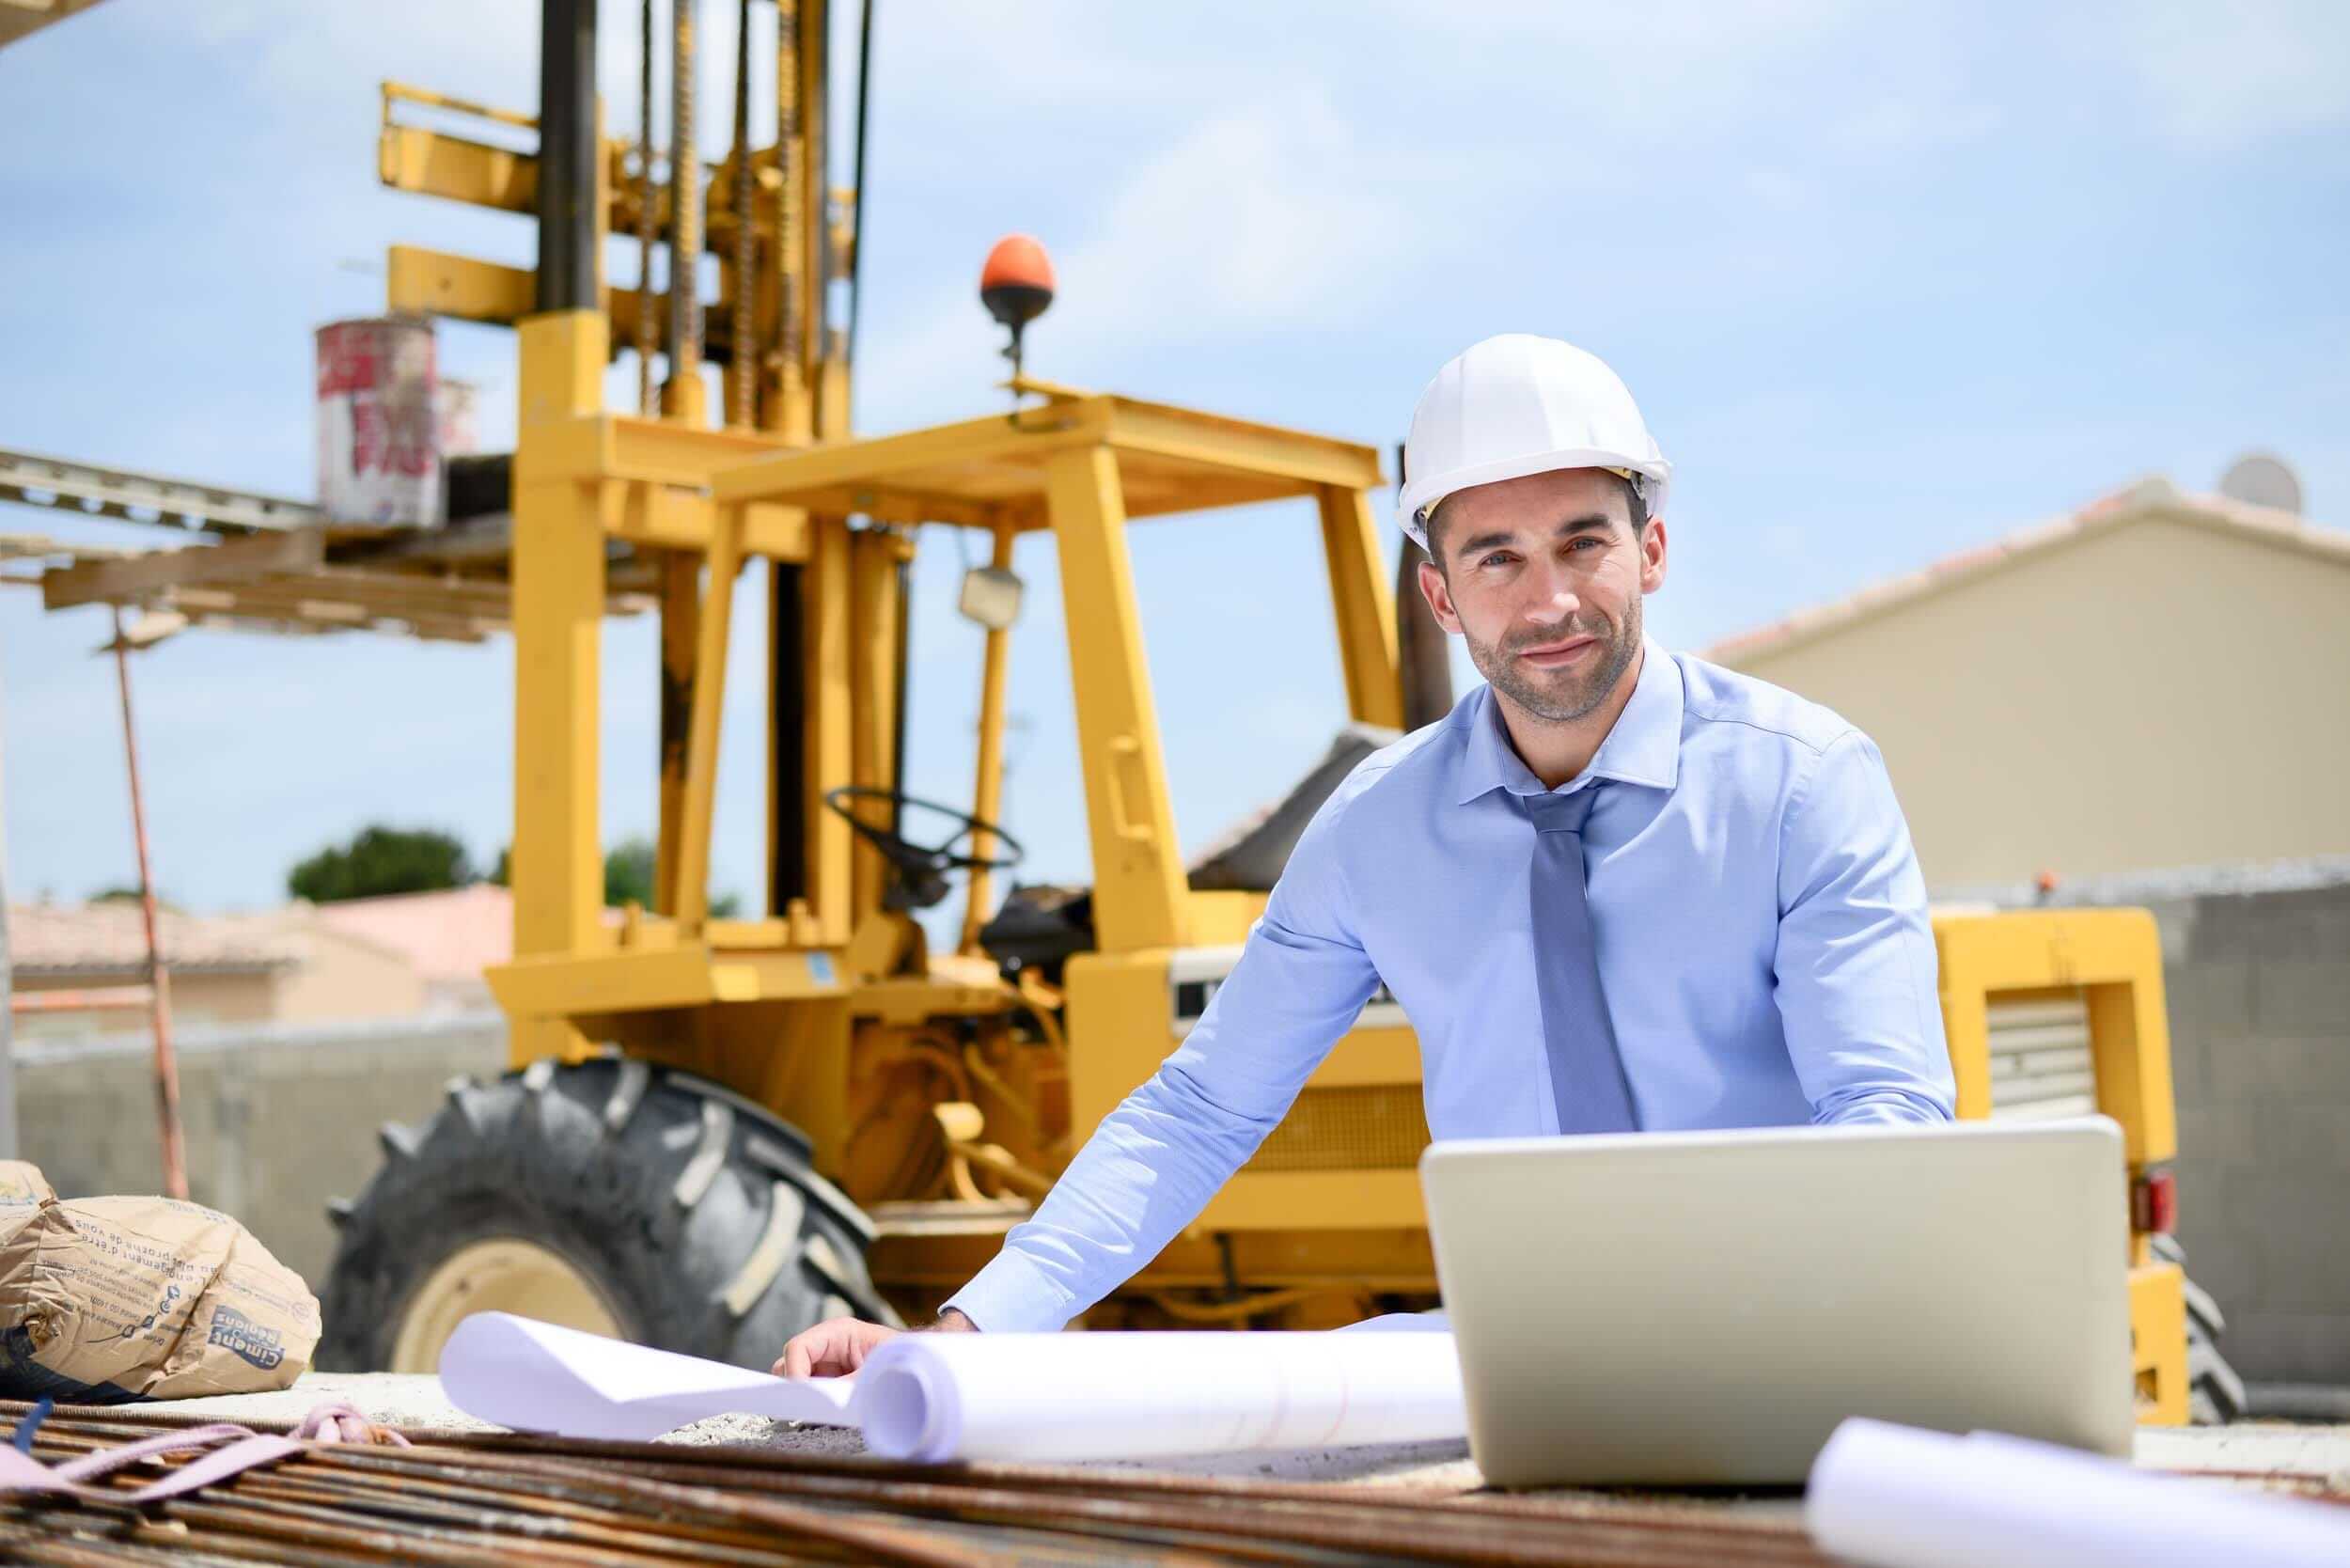 How to Become a Construction Supervisor